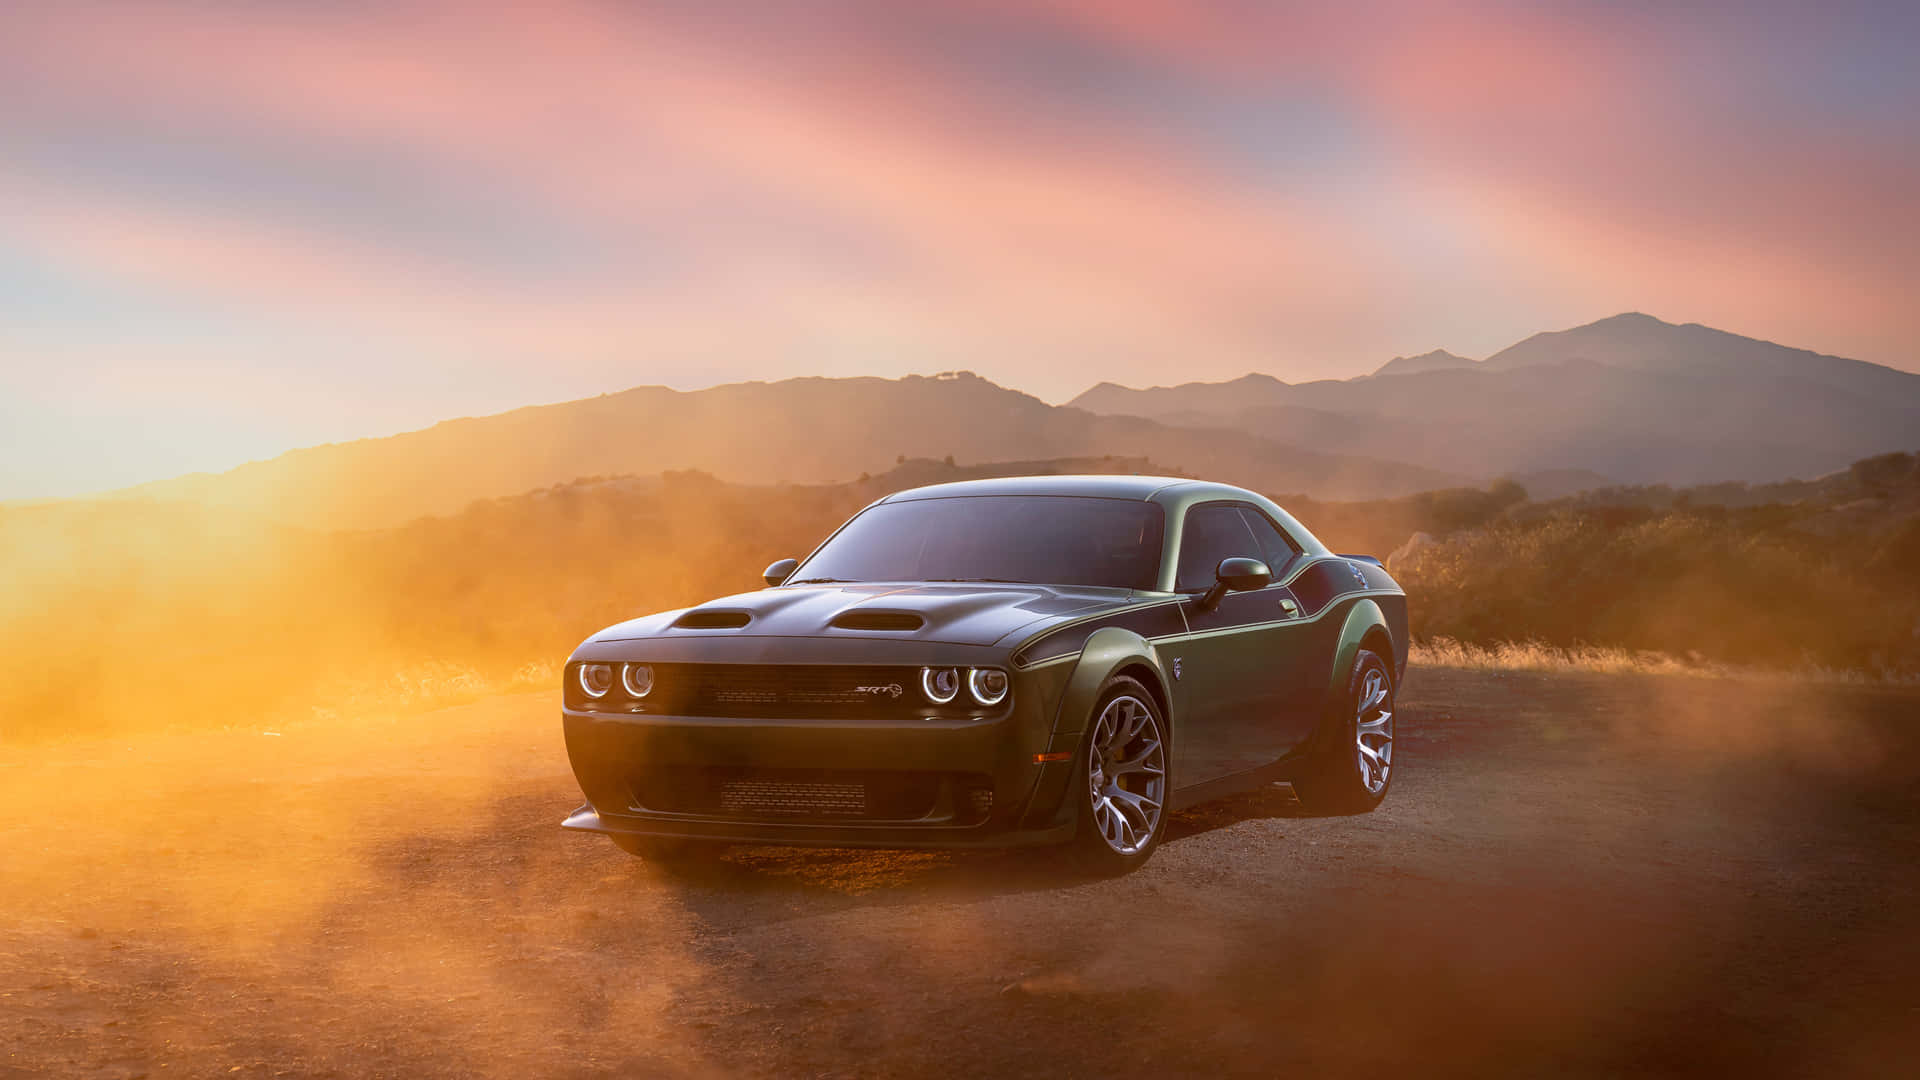 Dominate the Road with the Hellcat Wallpaper